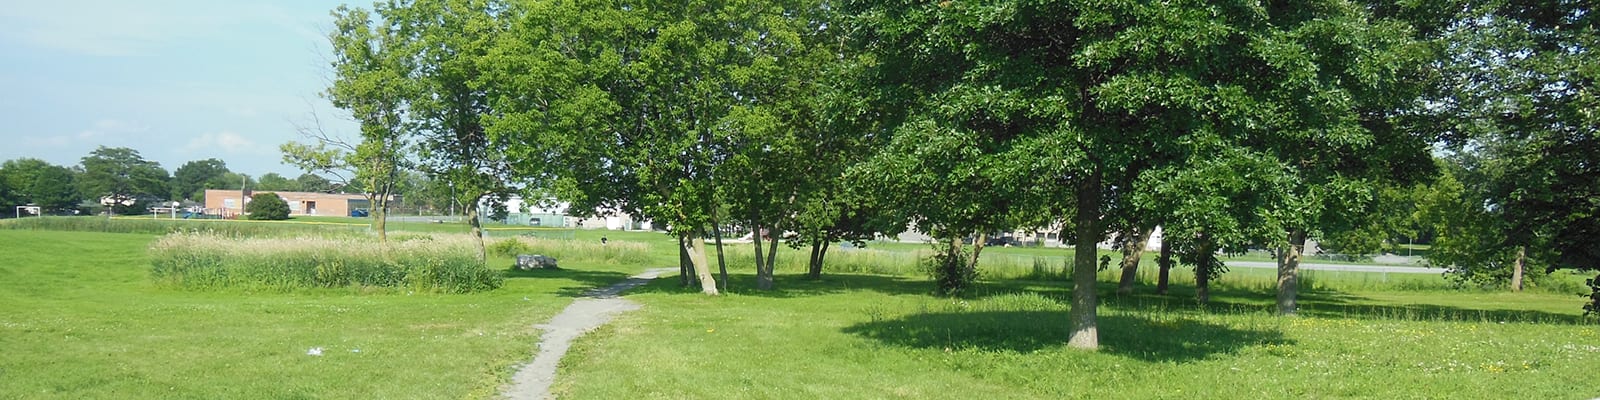 Open space with trees on the right side of the frame.